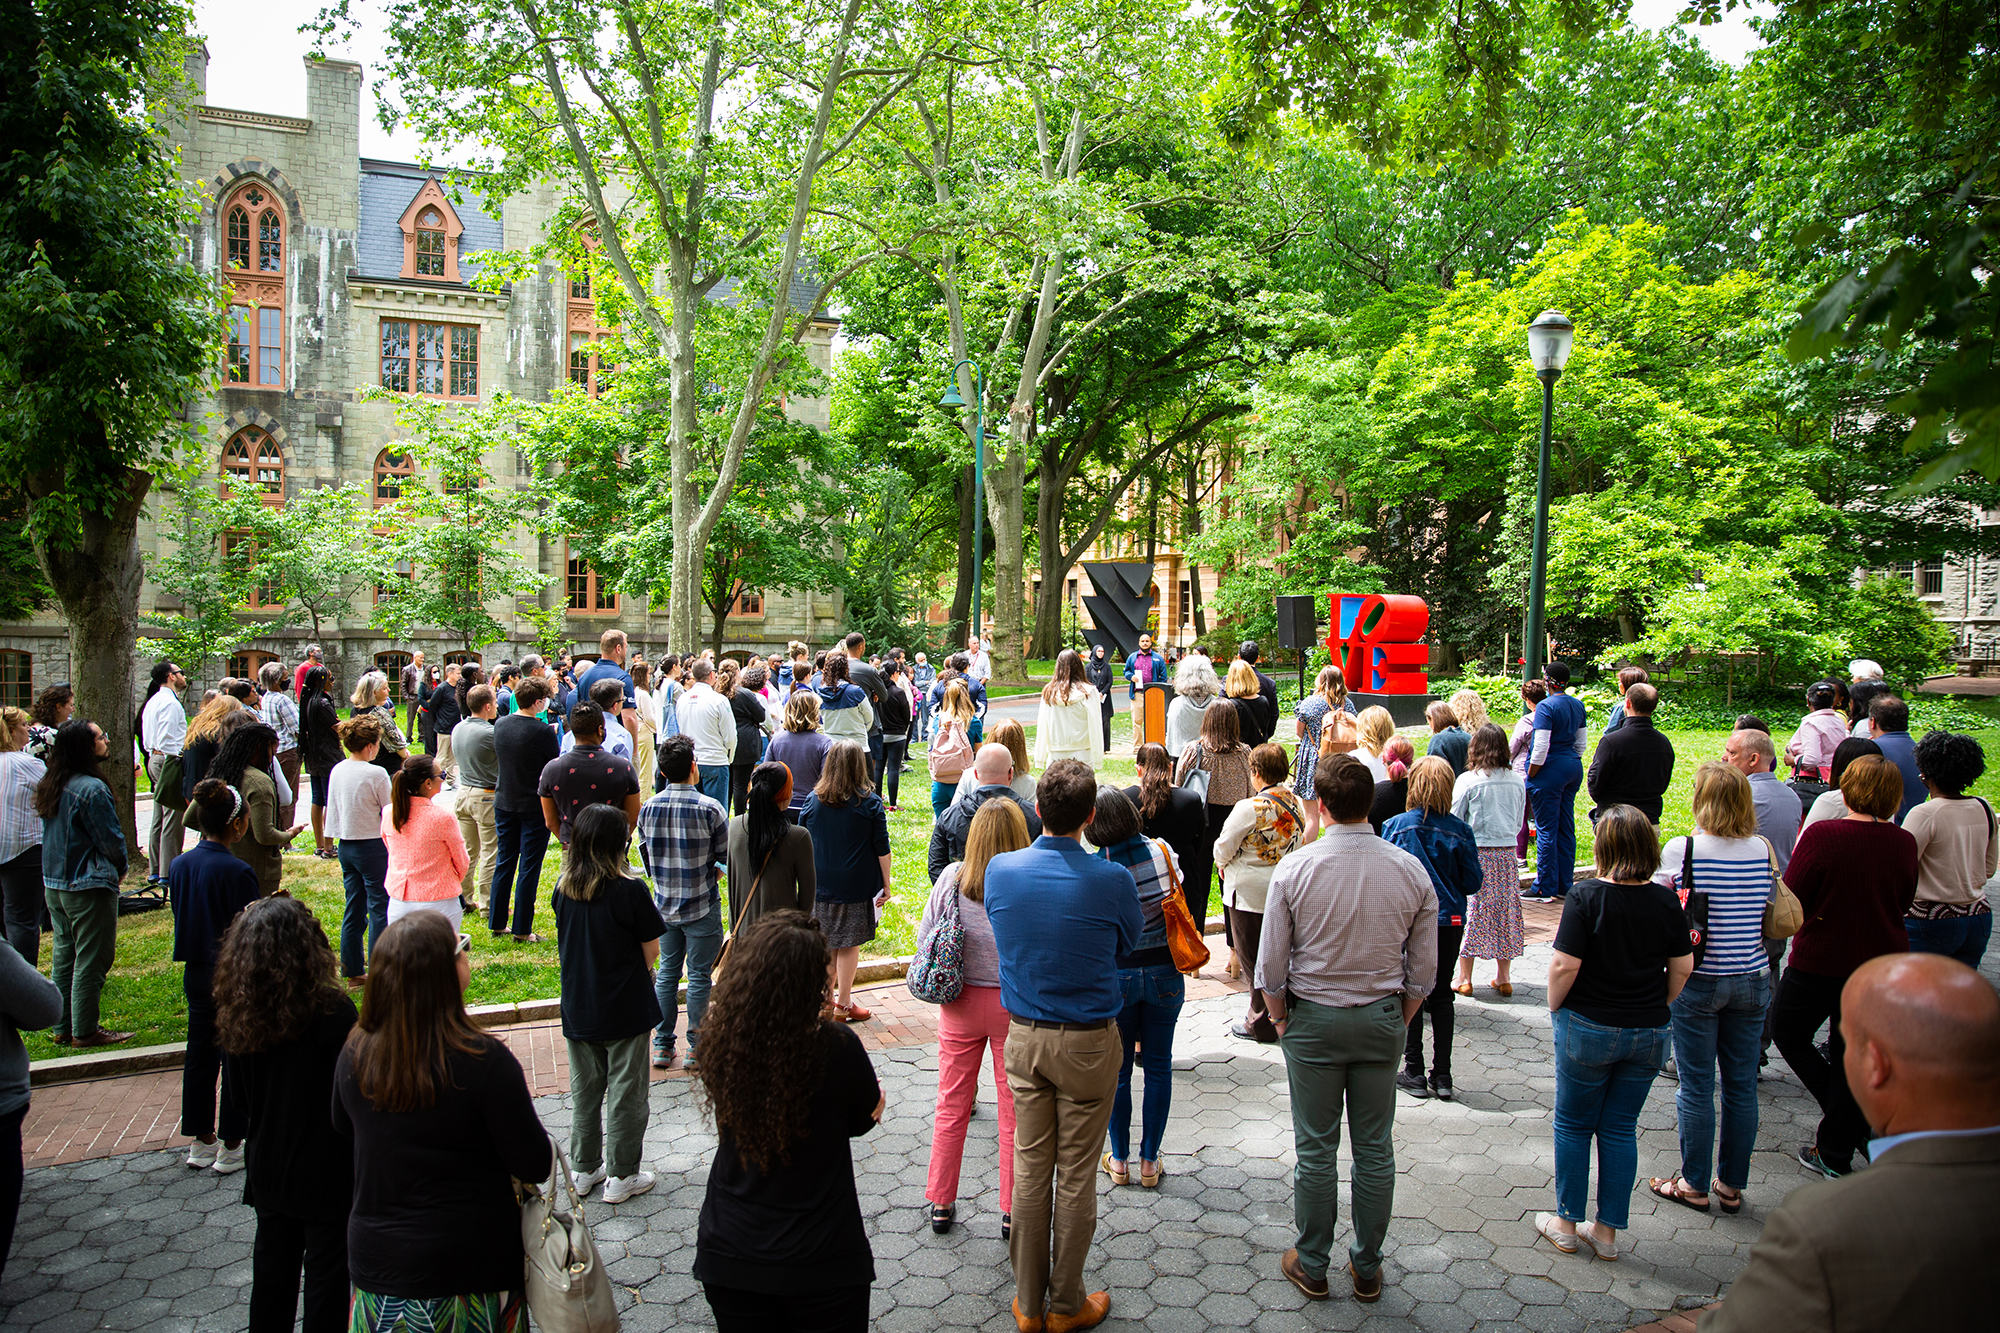 Penn’s chaplain Chaz Howard addresses a crowd assembled at Robert Indiana’s LOVE statue on Penn’s campus in front of College Hall.